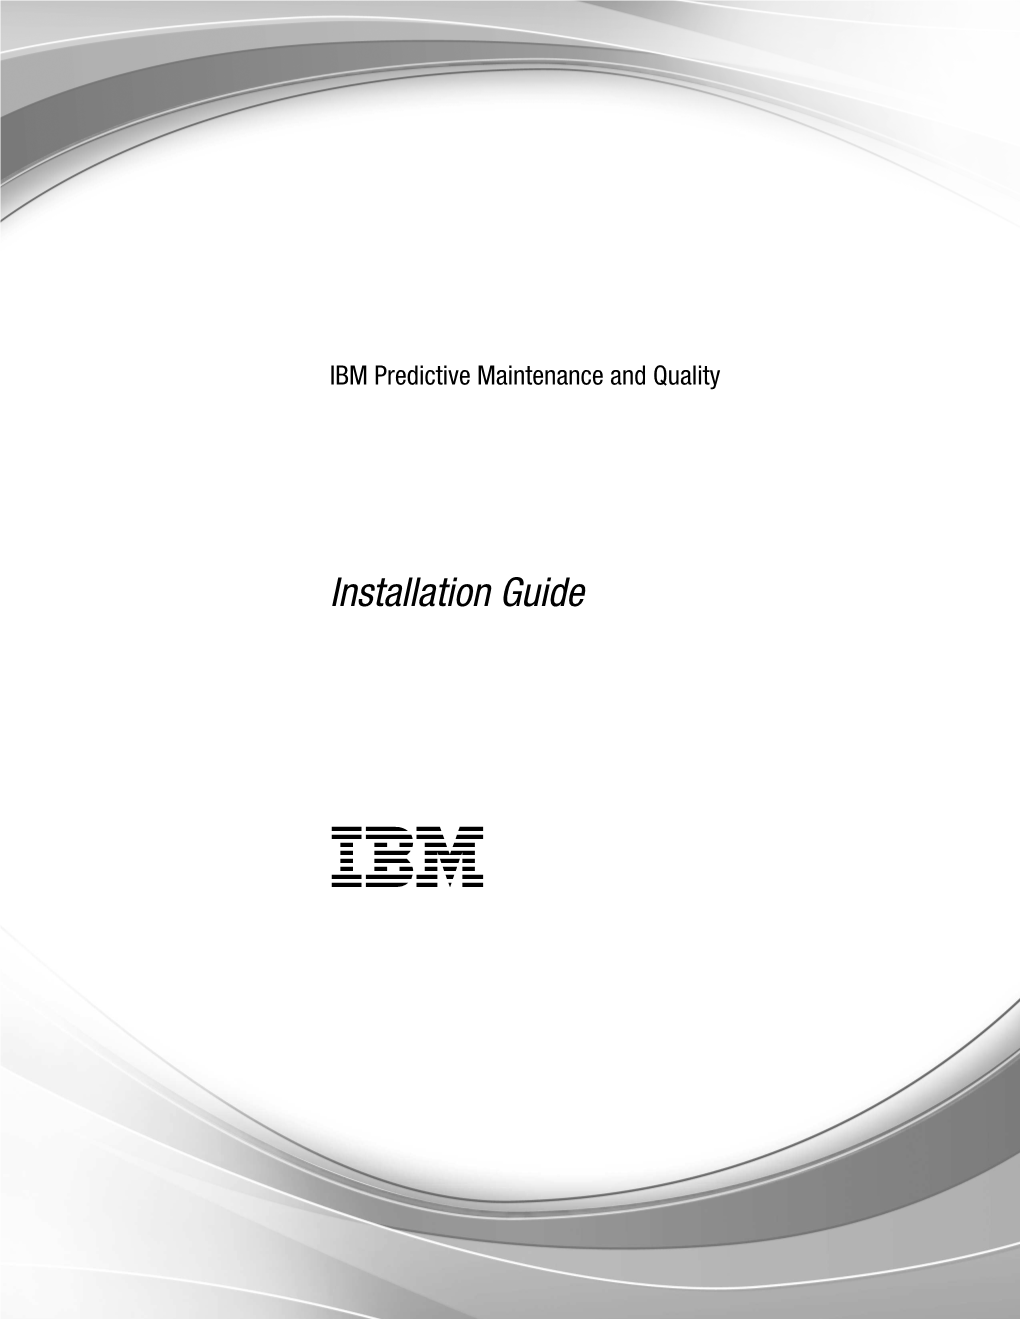 IBM Predictive Maintenance and Quality: Installation Guide Introduction